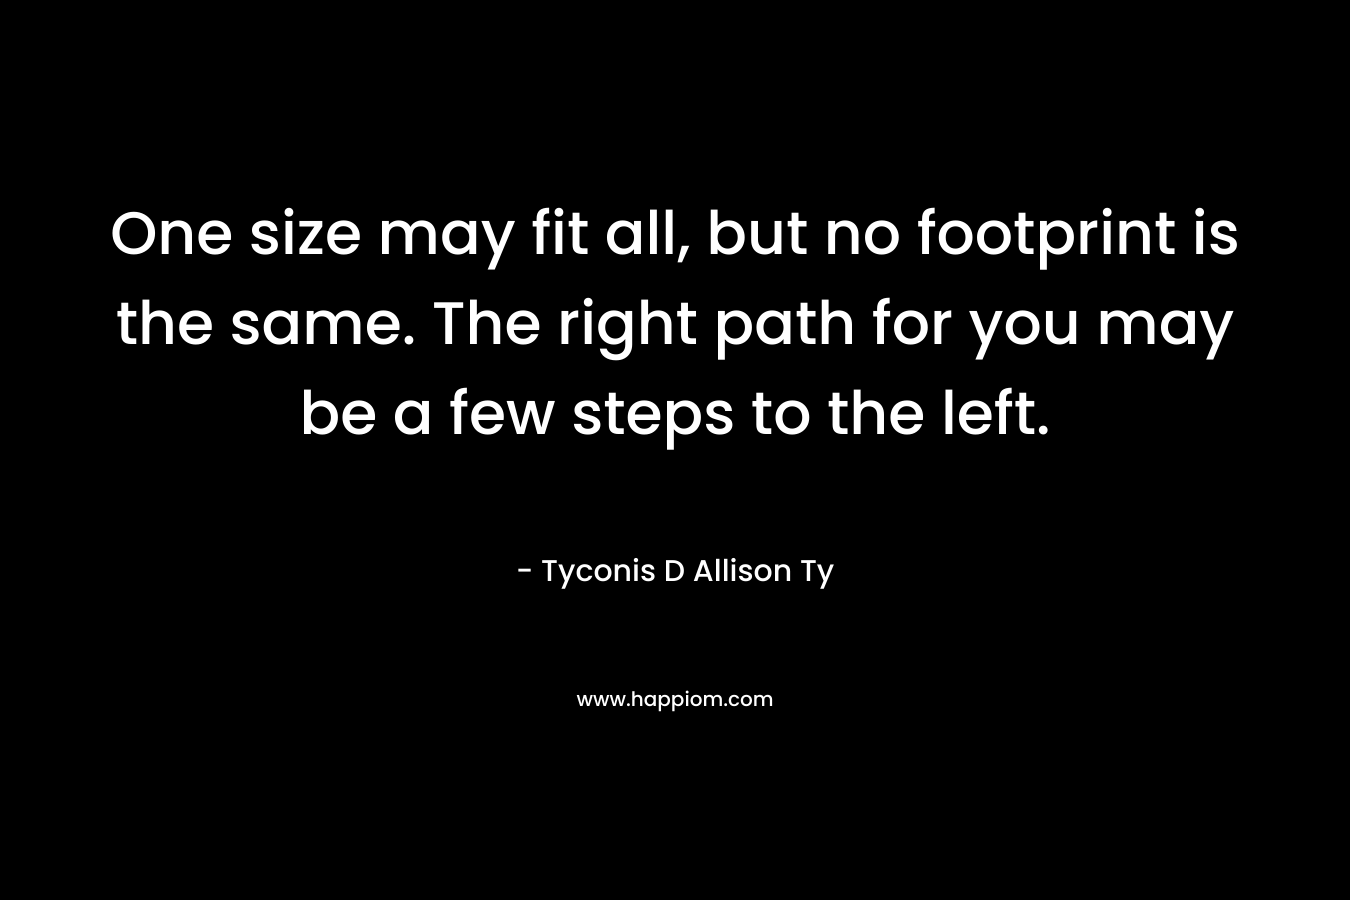 One size may fit all, but no footprint is the same. The right path for you may be a few steps to the left.